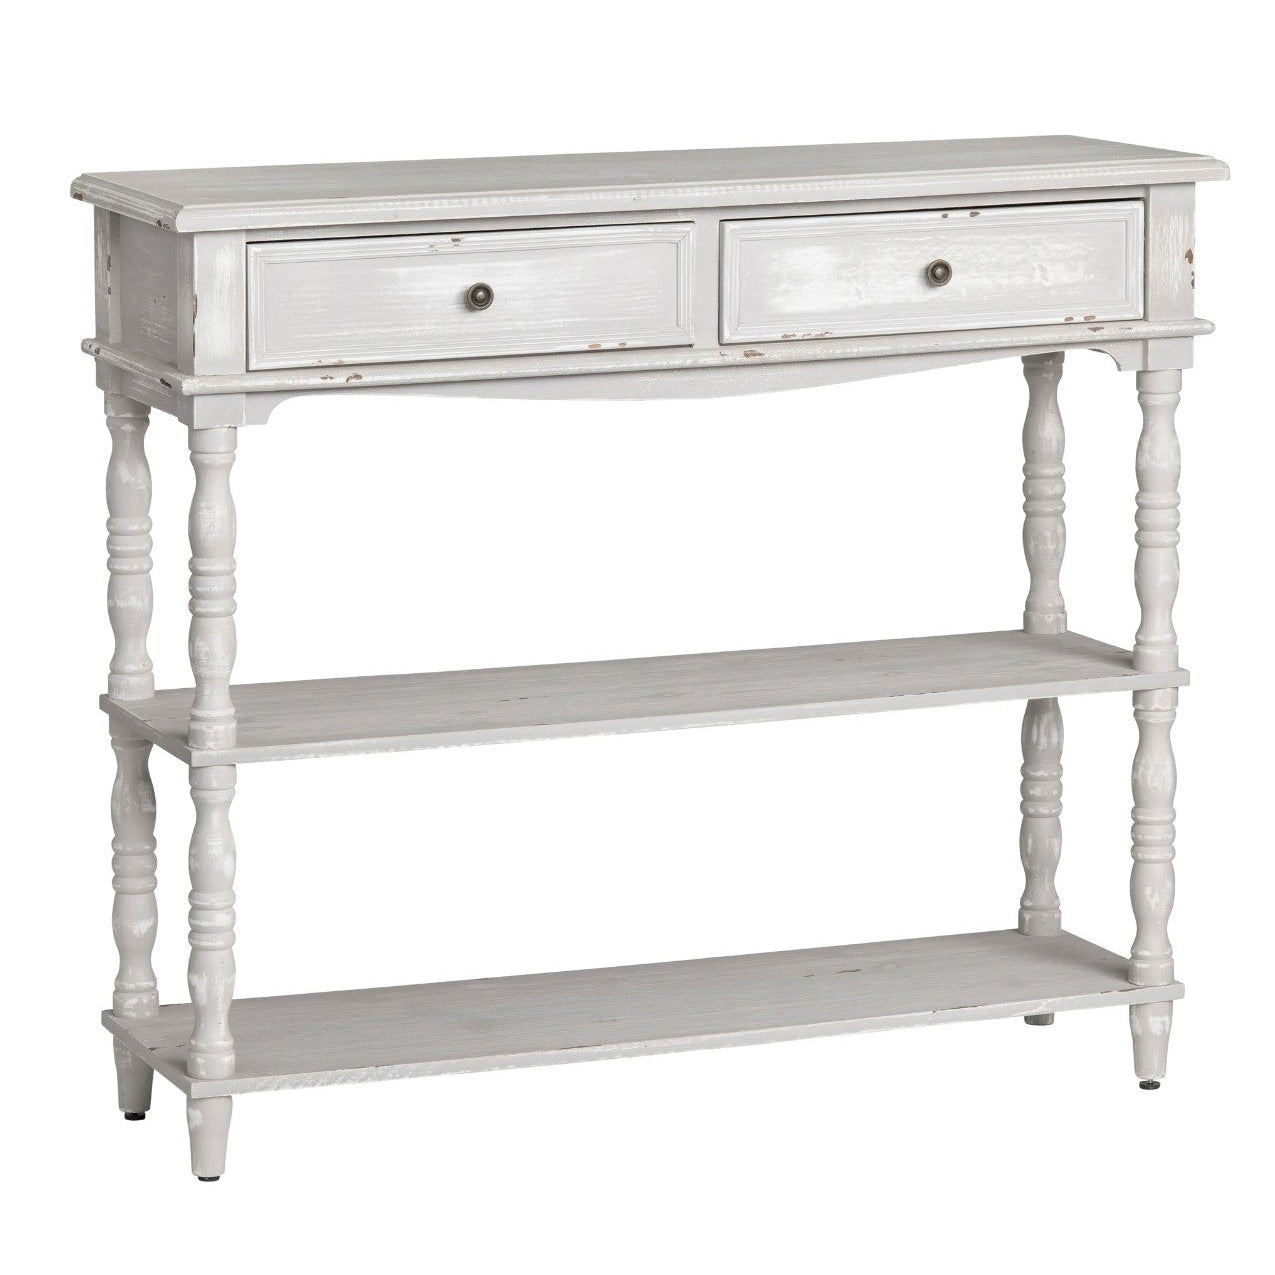 Crestview Collection Weston 42" x 13" x 36" 2-Drawer Traditional Wood Console Table In Chalk Gray Finish